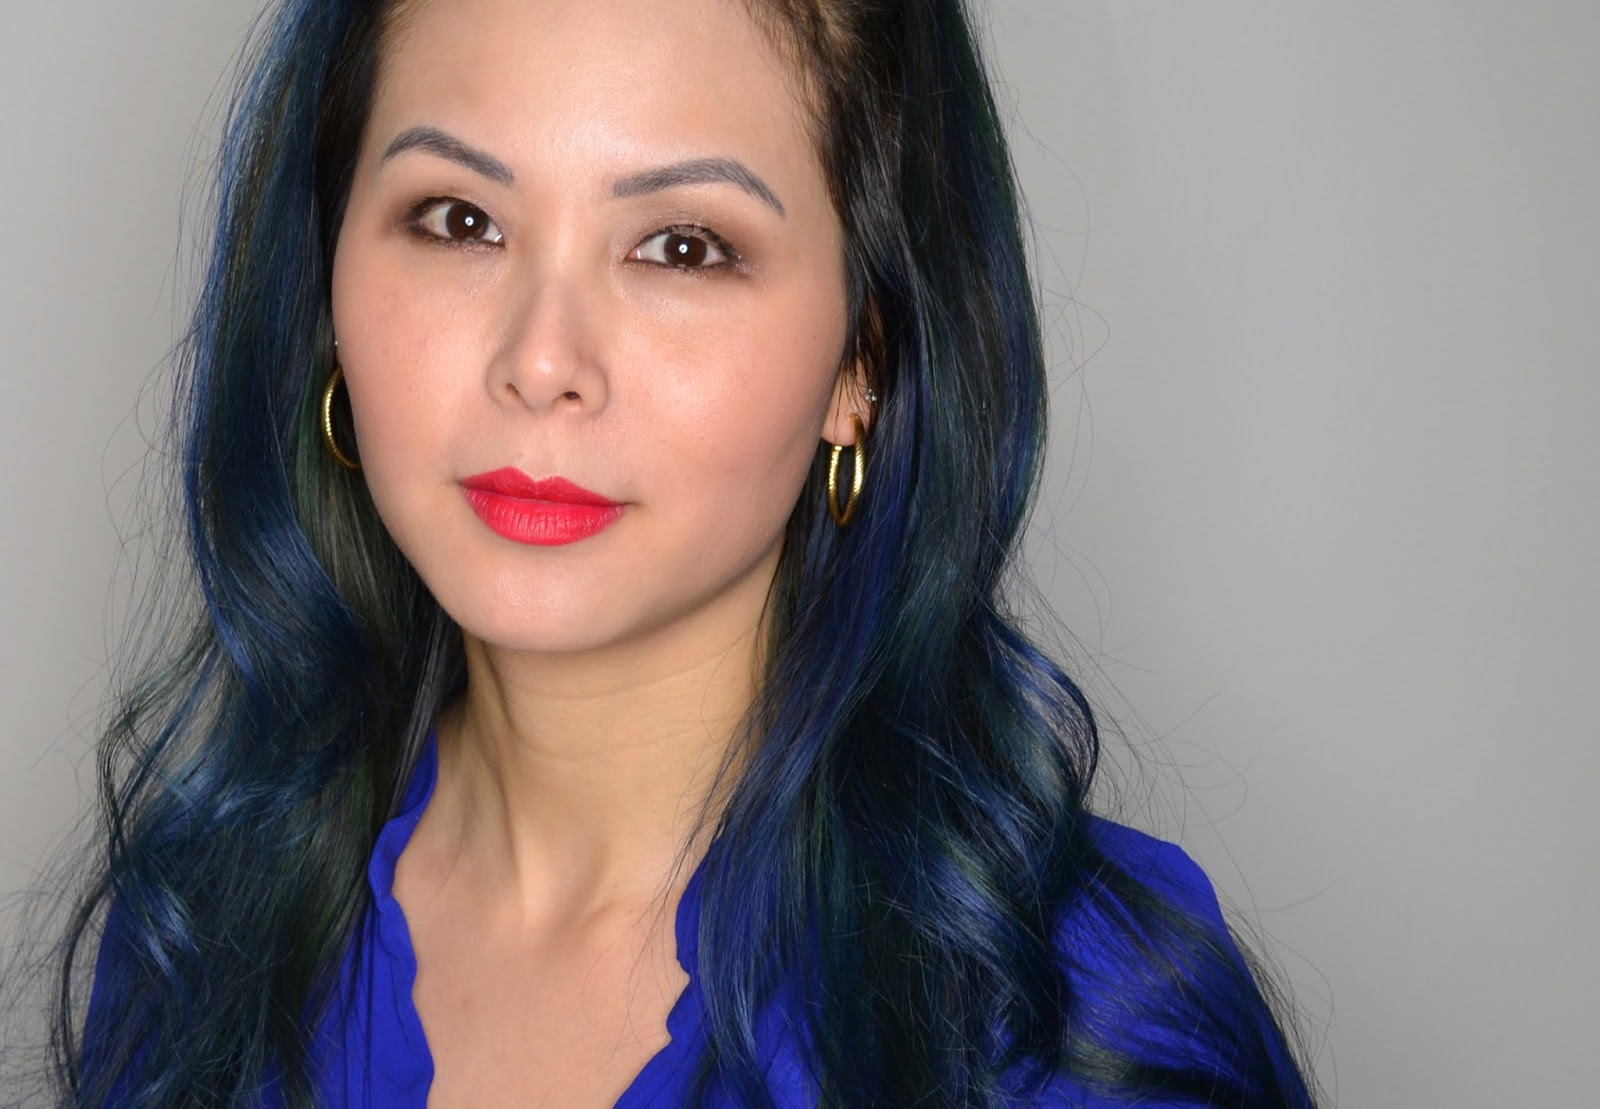 Best makeup looks for blue hair and pale skin - wide 3